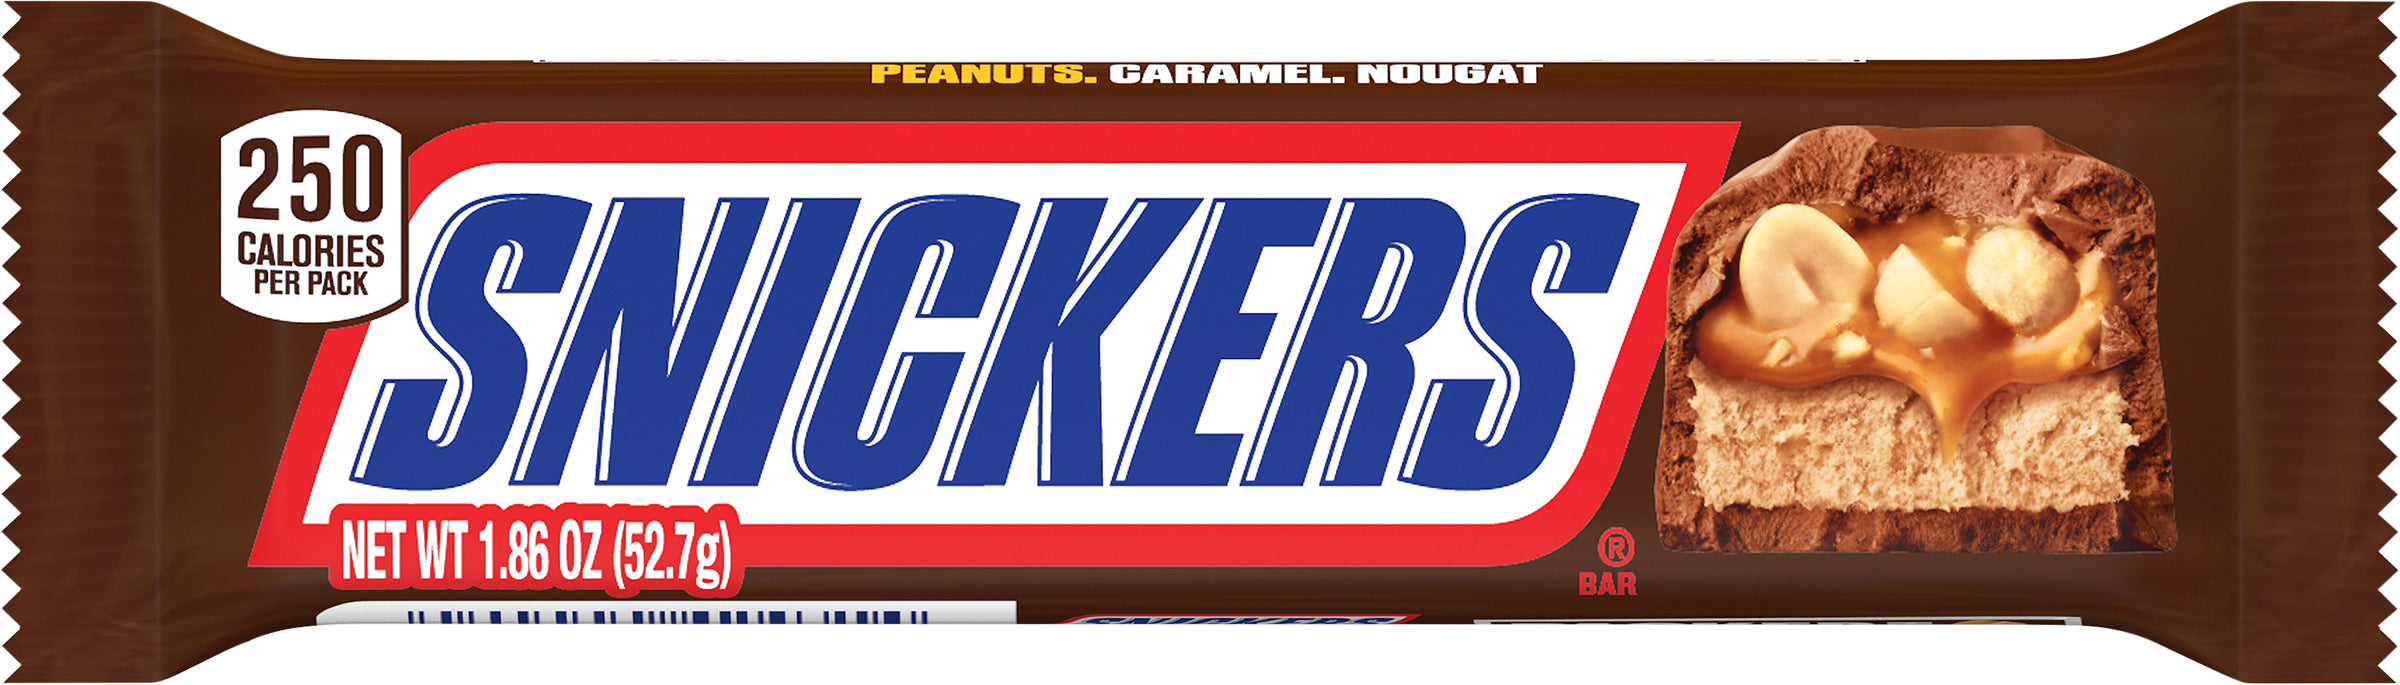 SNICKERS Singles Size Chocolate Candy Bars, 1.86 Oz